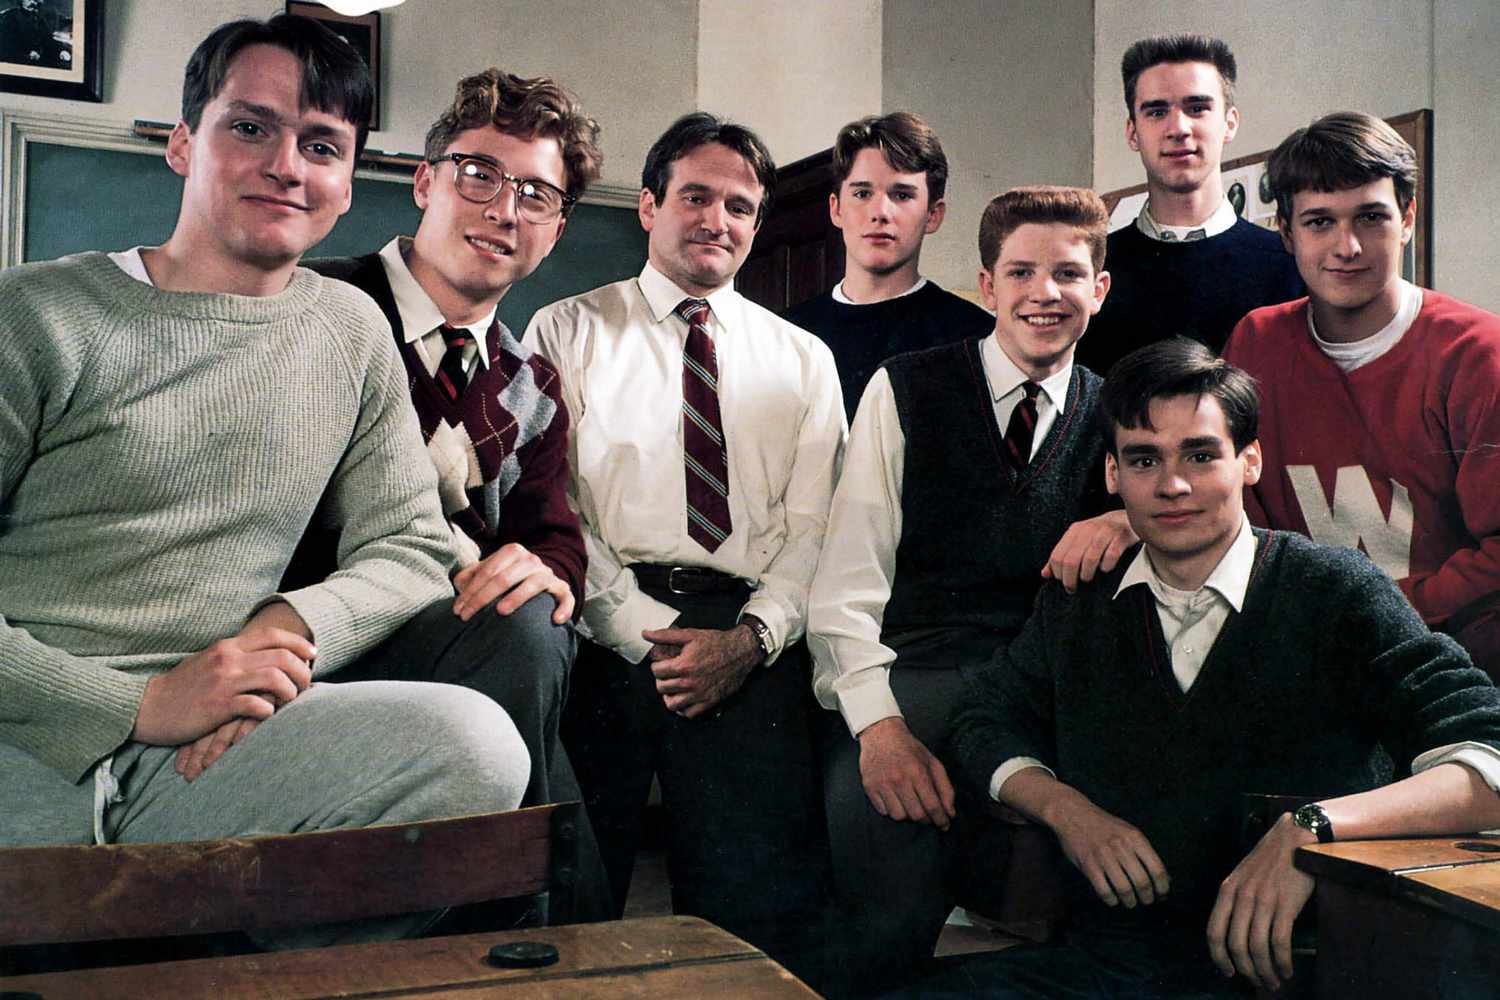 The Cast of Dead Poets Society (1989)